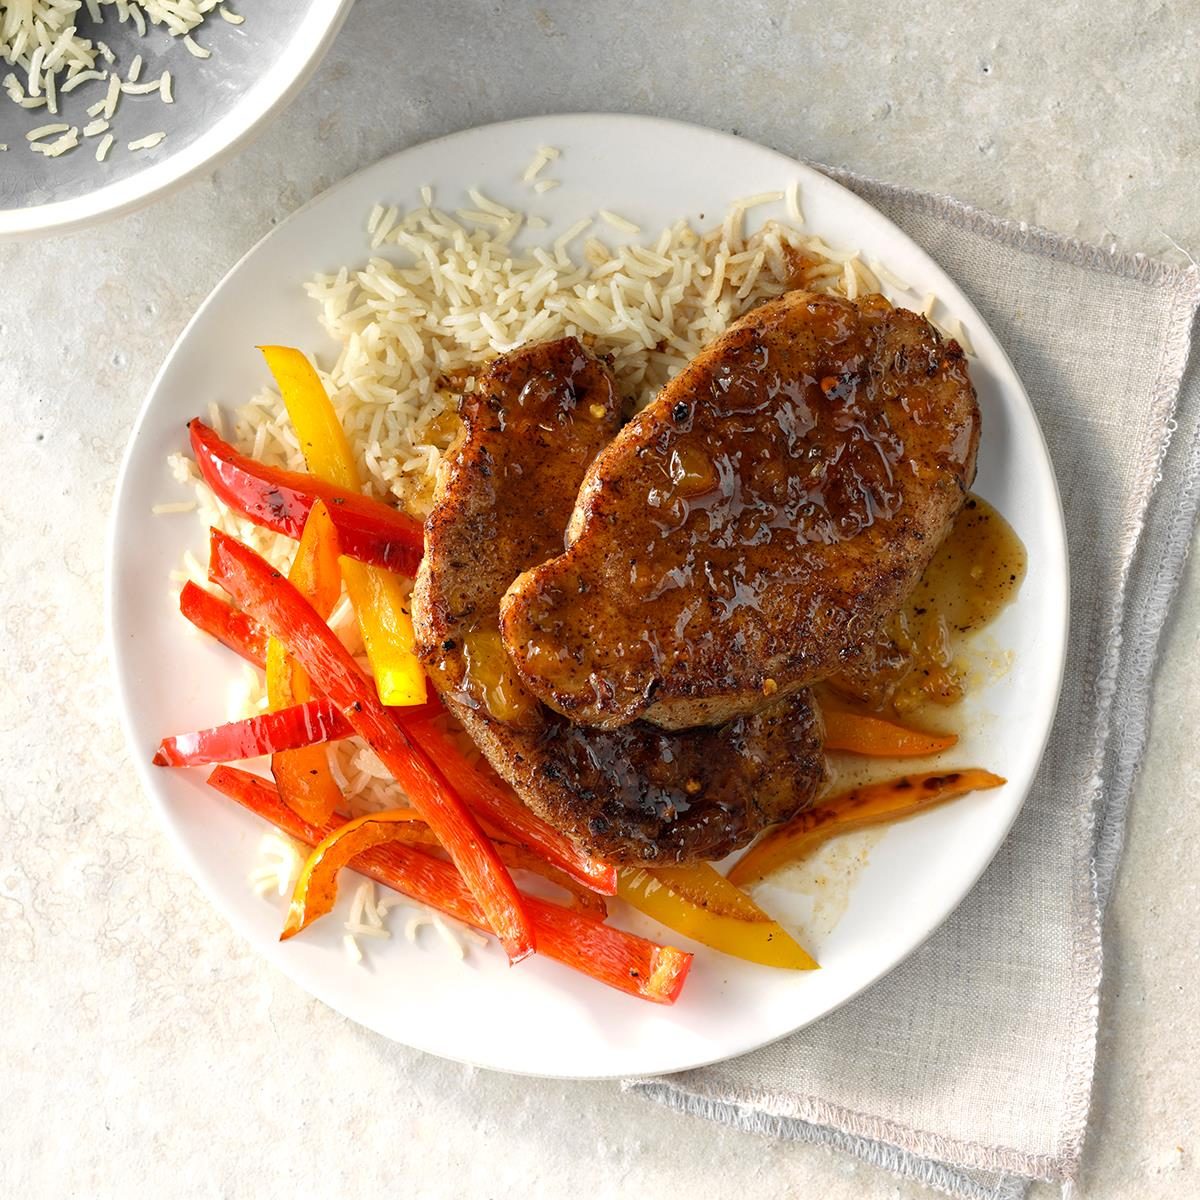 <p>These sweet, spicy chops can be thrown together in minutes, but definitely don't taste like it. Serve it with a side of jasmine rice and you'll feel like you're on a tropical vacation. —Allison Ulrich, Frisco, Texas</p> <div class="listicle-page__buttons"> <div class="listicle-page__cta-button"><a href='https://www.tasteofhome.com/recipes/jamaican-jerk-pork-chops/'>Go to Recipe</a></div> </div>